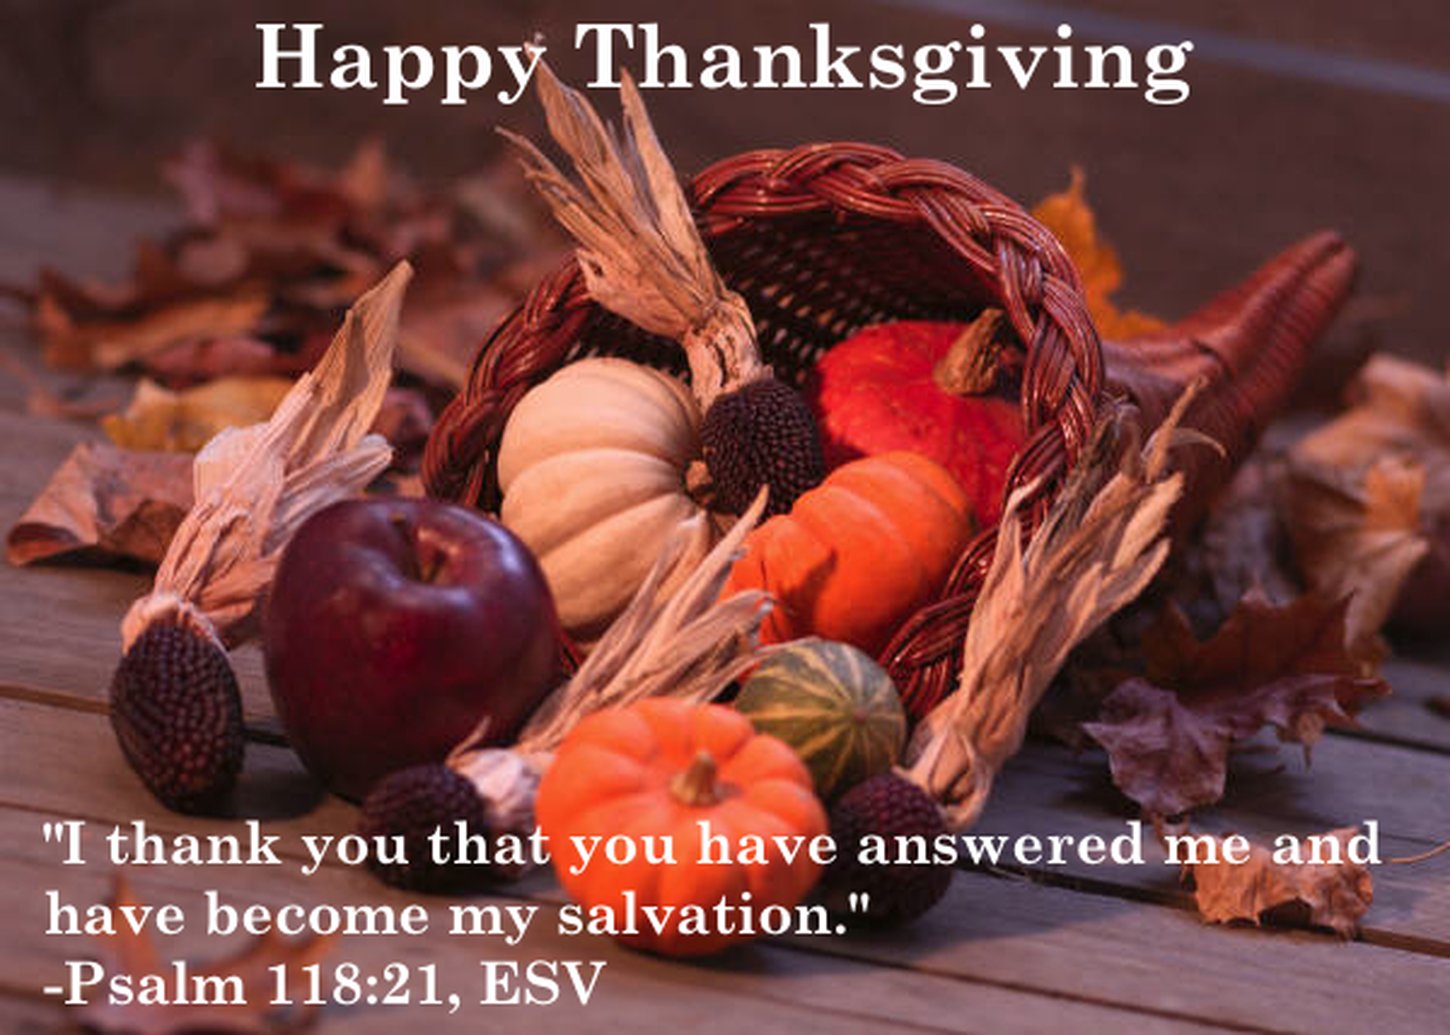 Wishing all of our readers a blessed Thanksgiving!